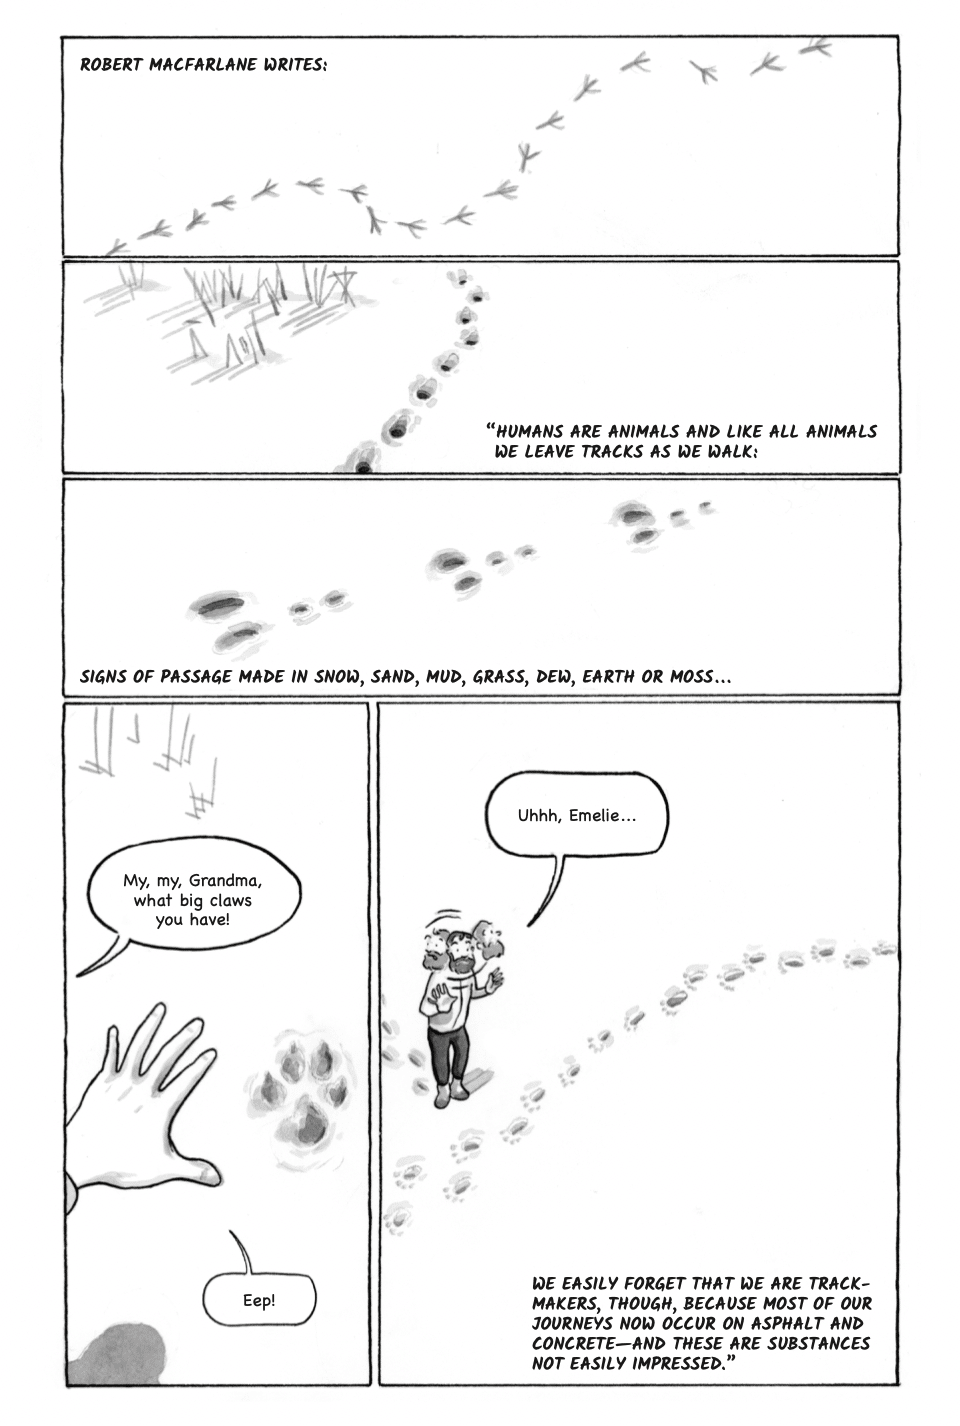 A black and white comic illustration of Navied in the snow, looking at animal tracks. A Robert Macfarlane quote is split between the 5 panels.